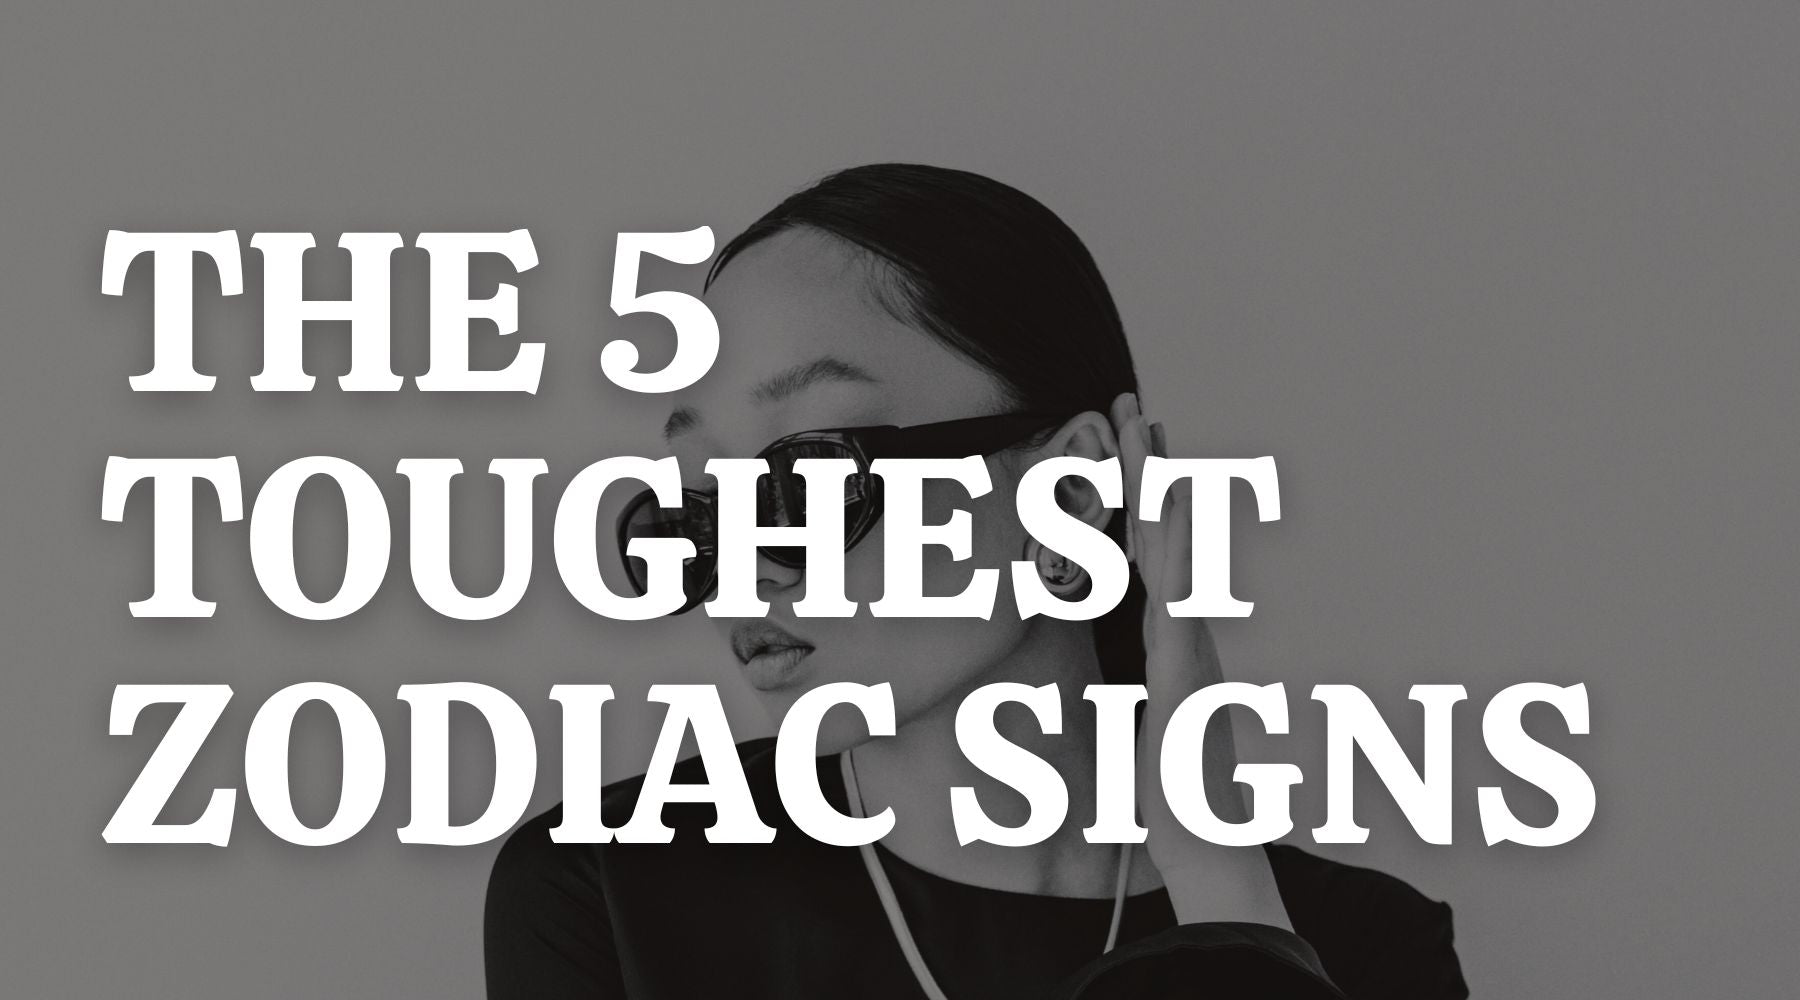 These are the 3 most powerful and charismatic zodiac signs